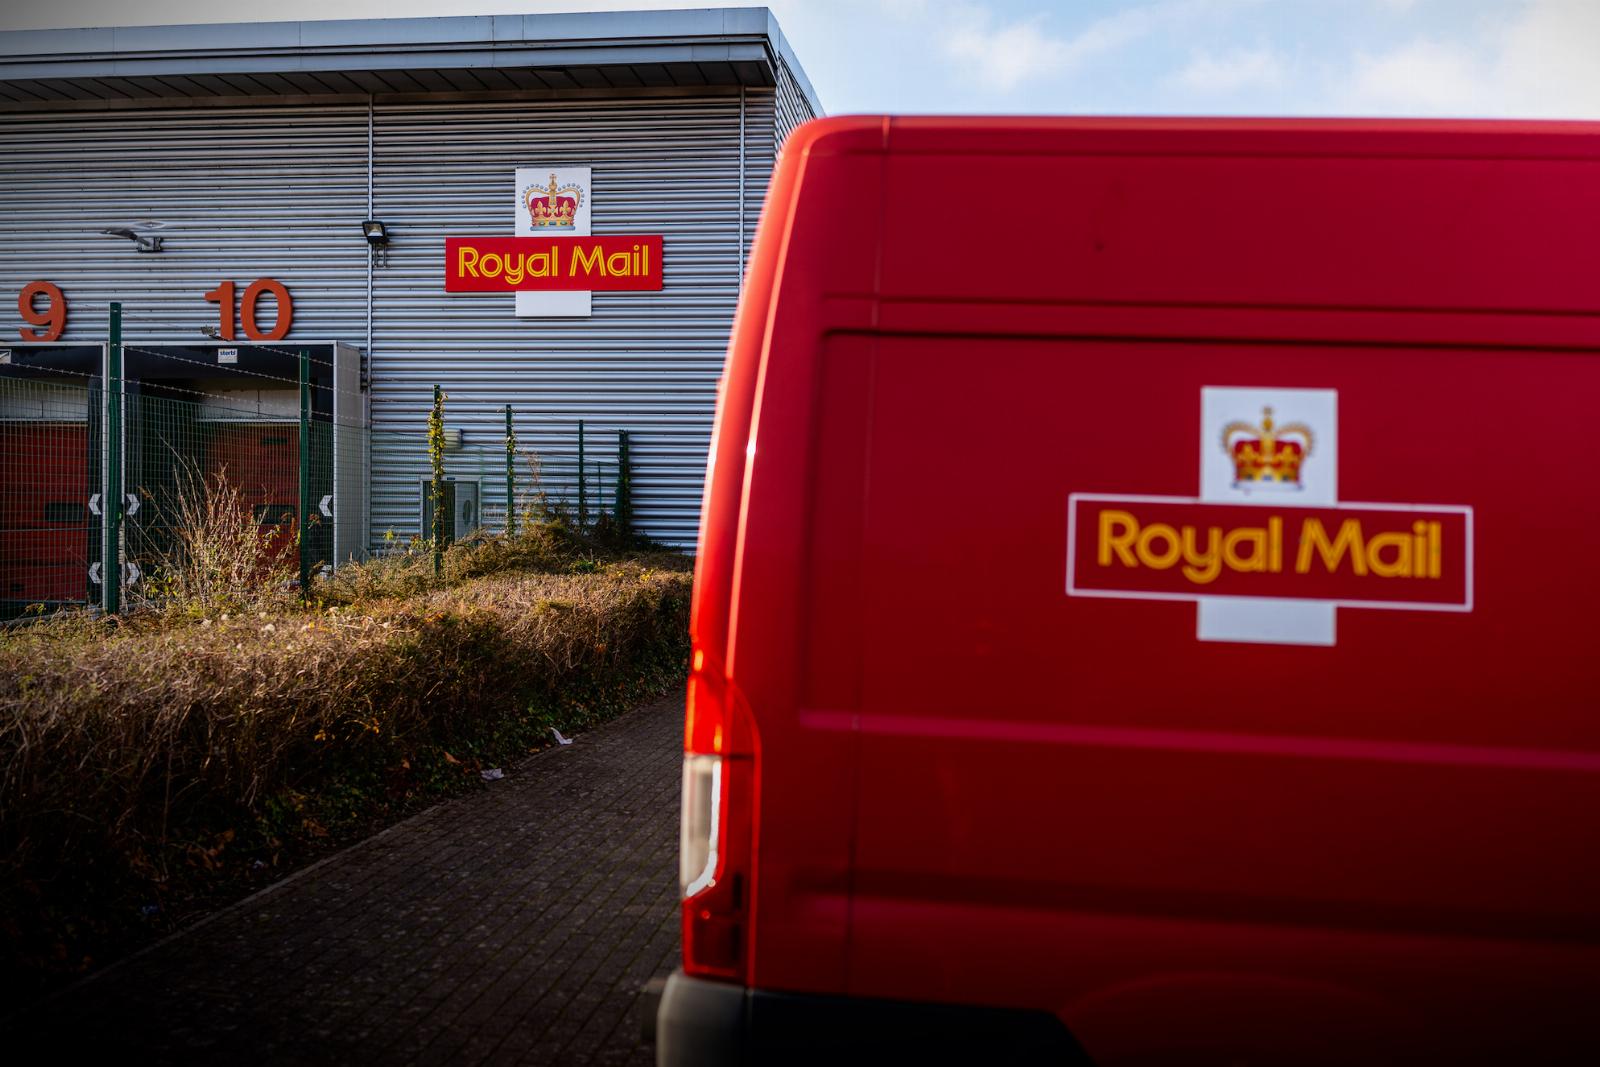 Royal Mail refused to pay ‘absurd’ LockBit ransom, chat logs say